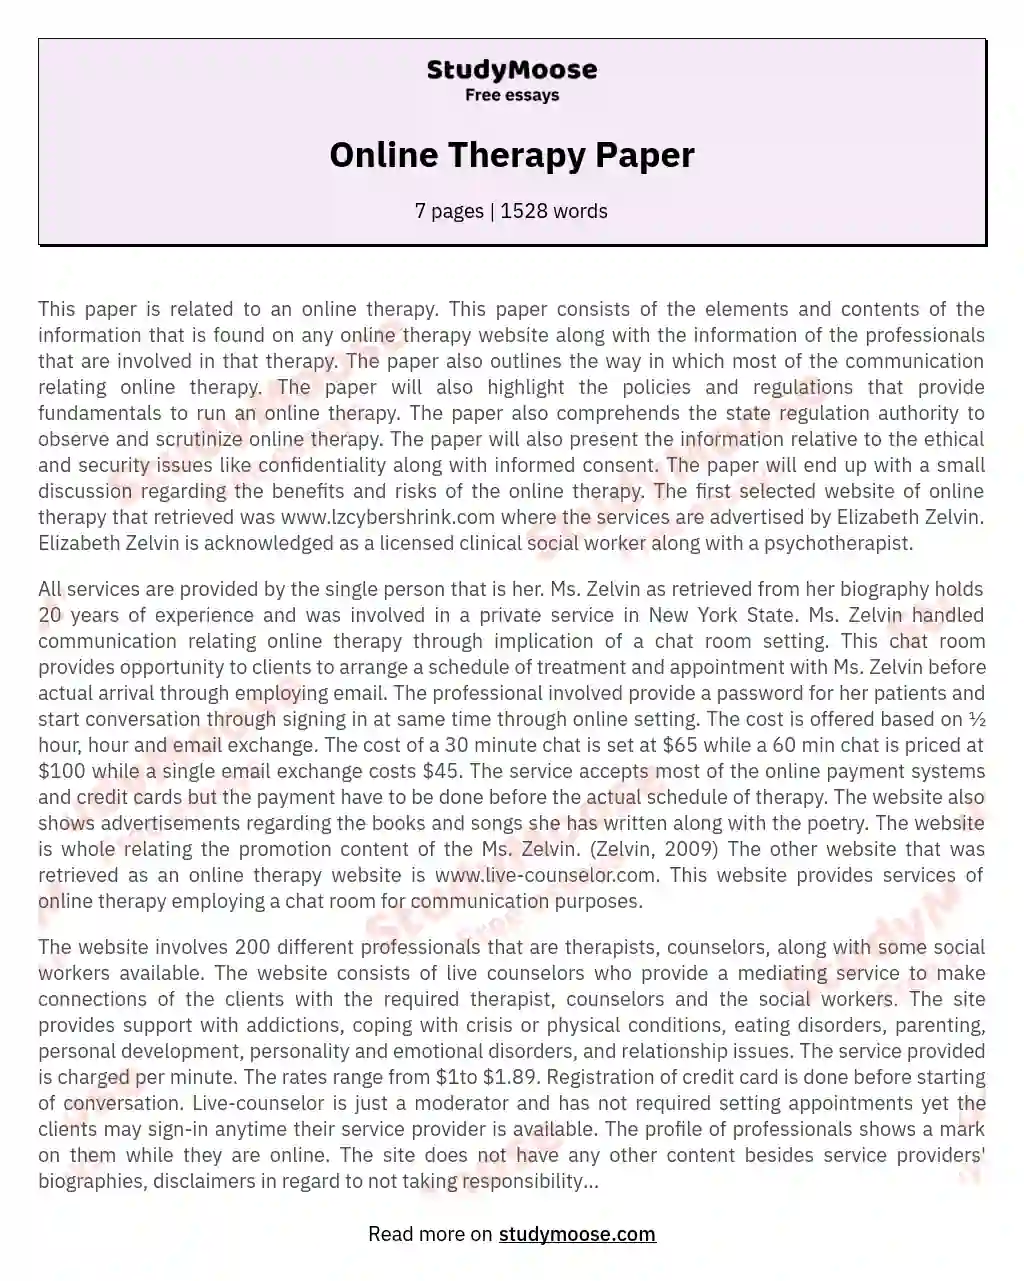 Online Therapy Paper essay